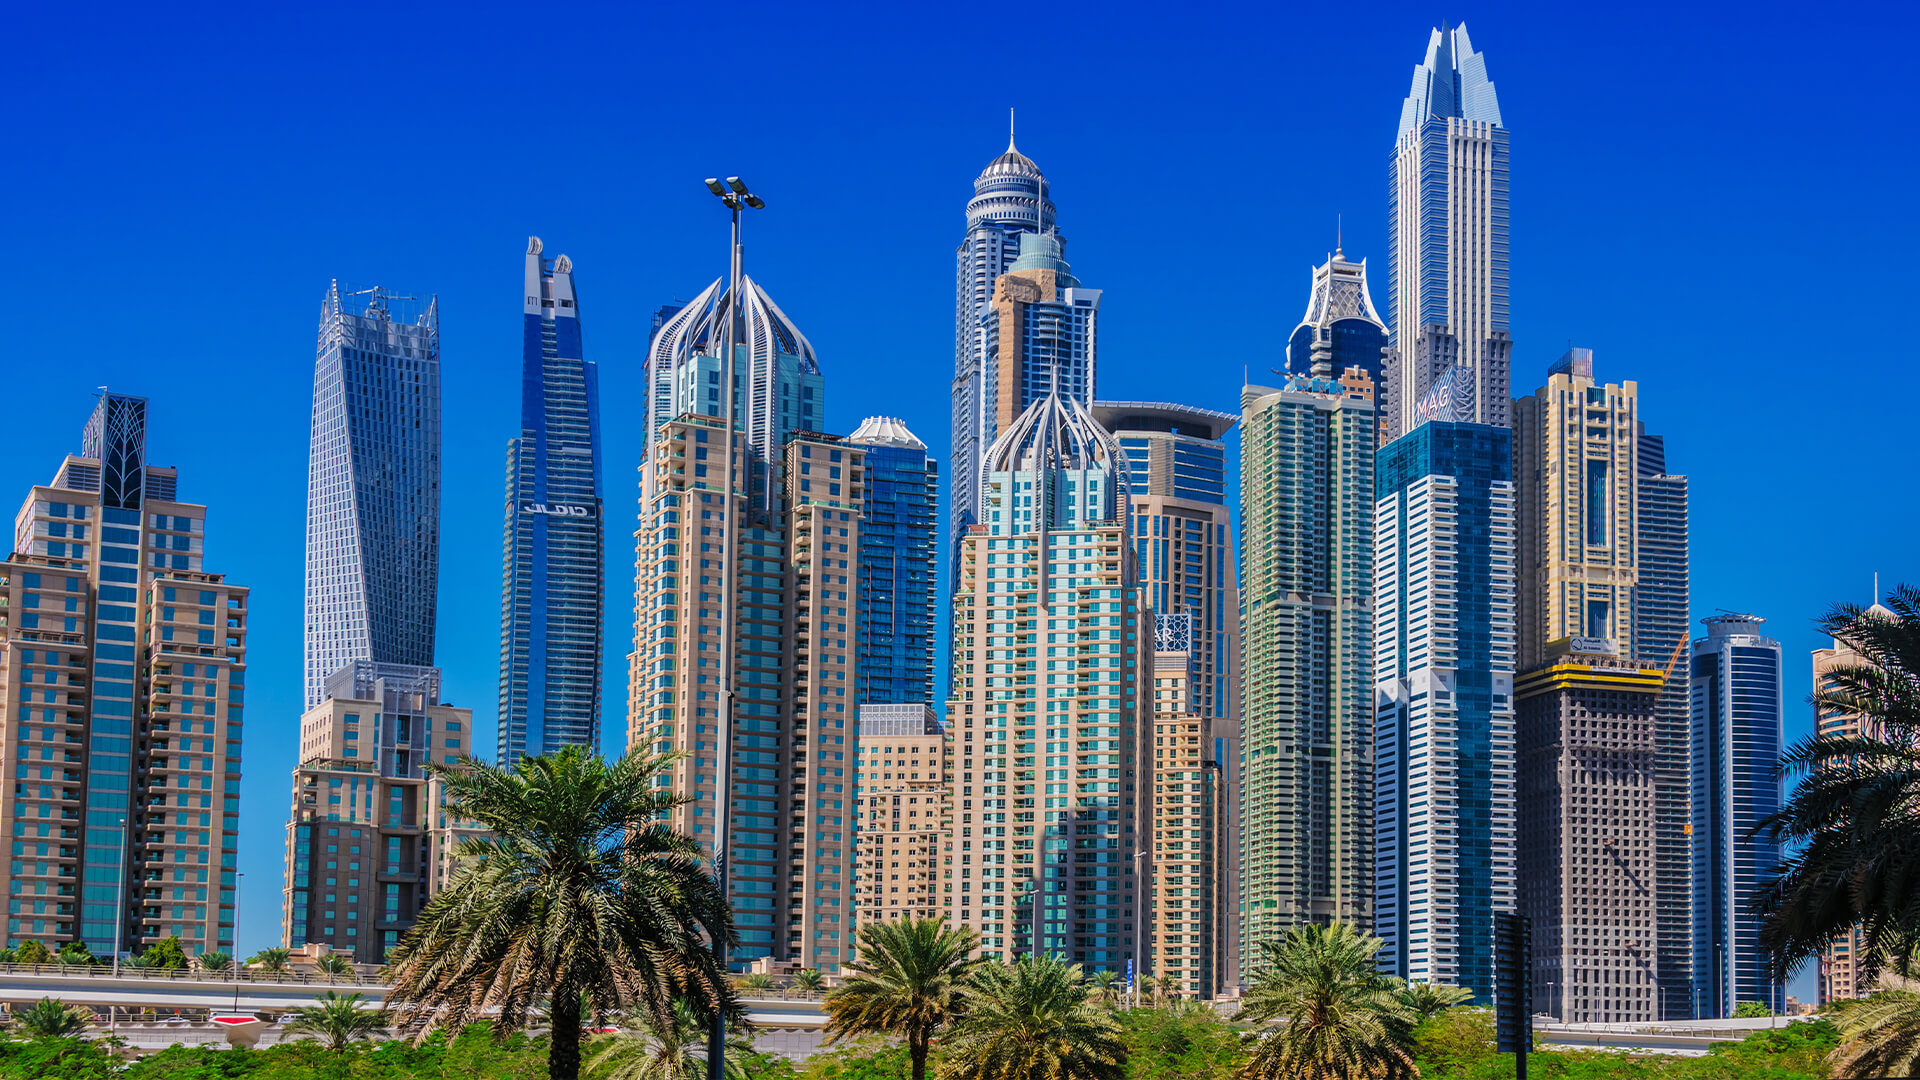 Can an Indian buy a property in Dubai?